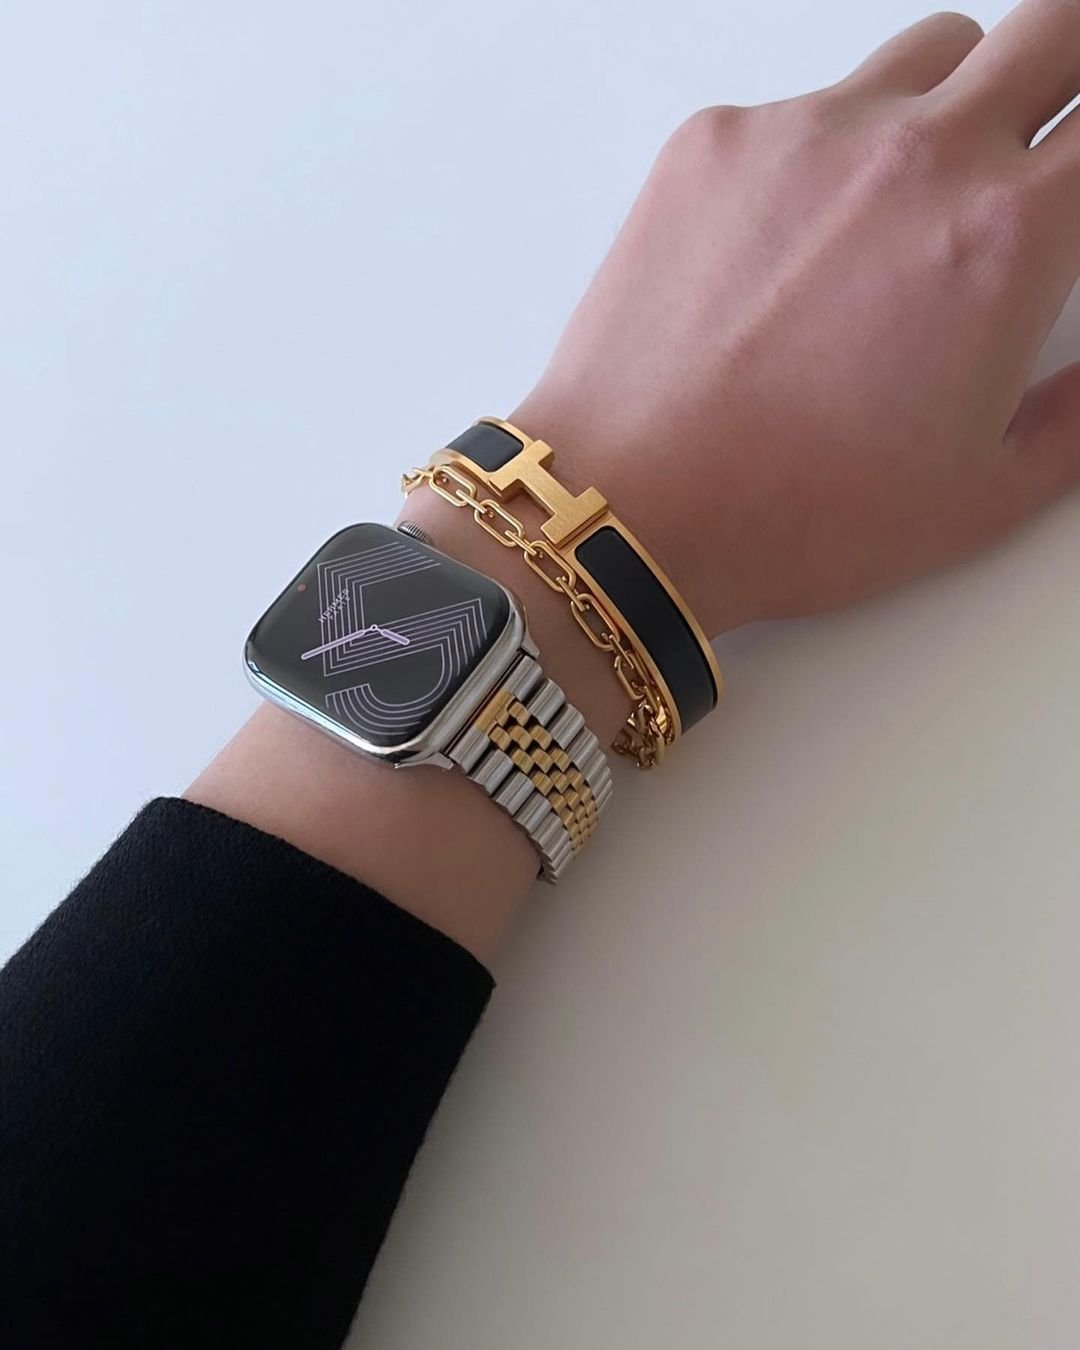 10 Best Smartwatches For Women In 2022 The Ultimate Guide Thetrackable